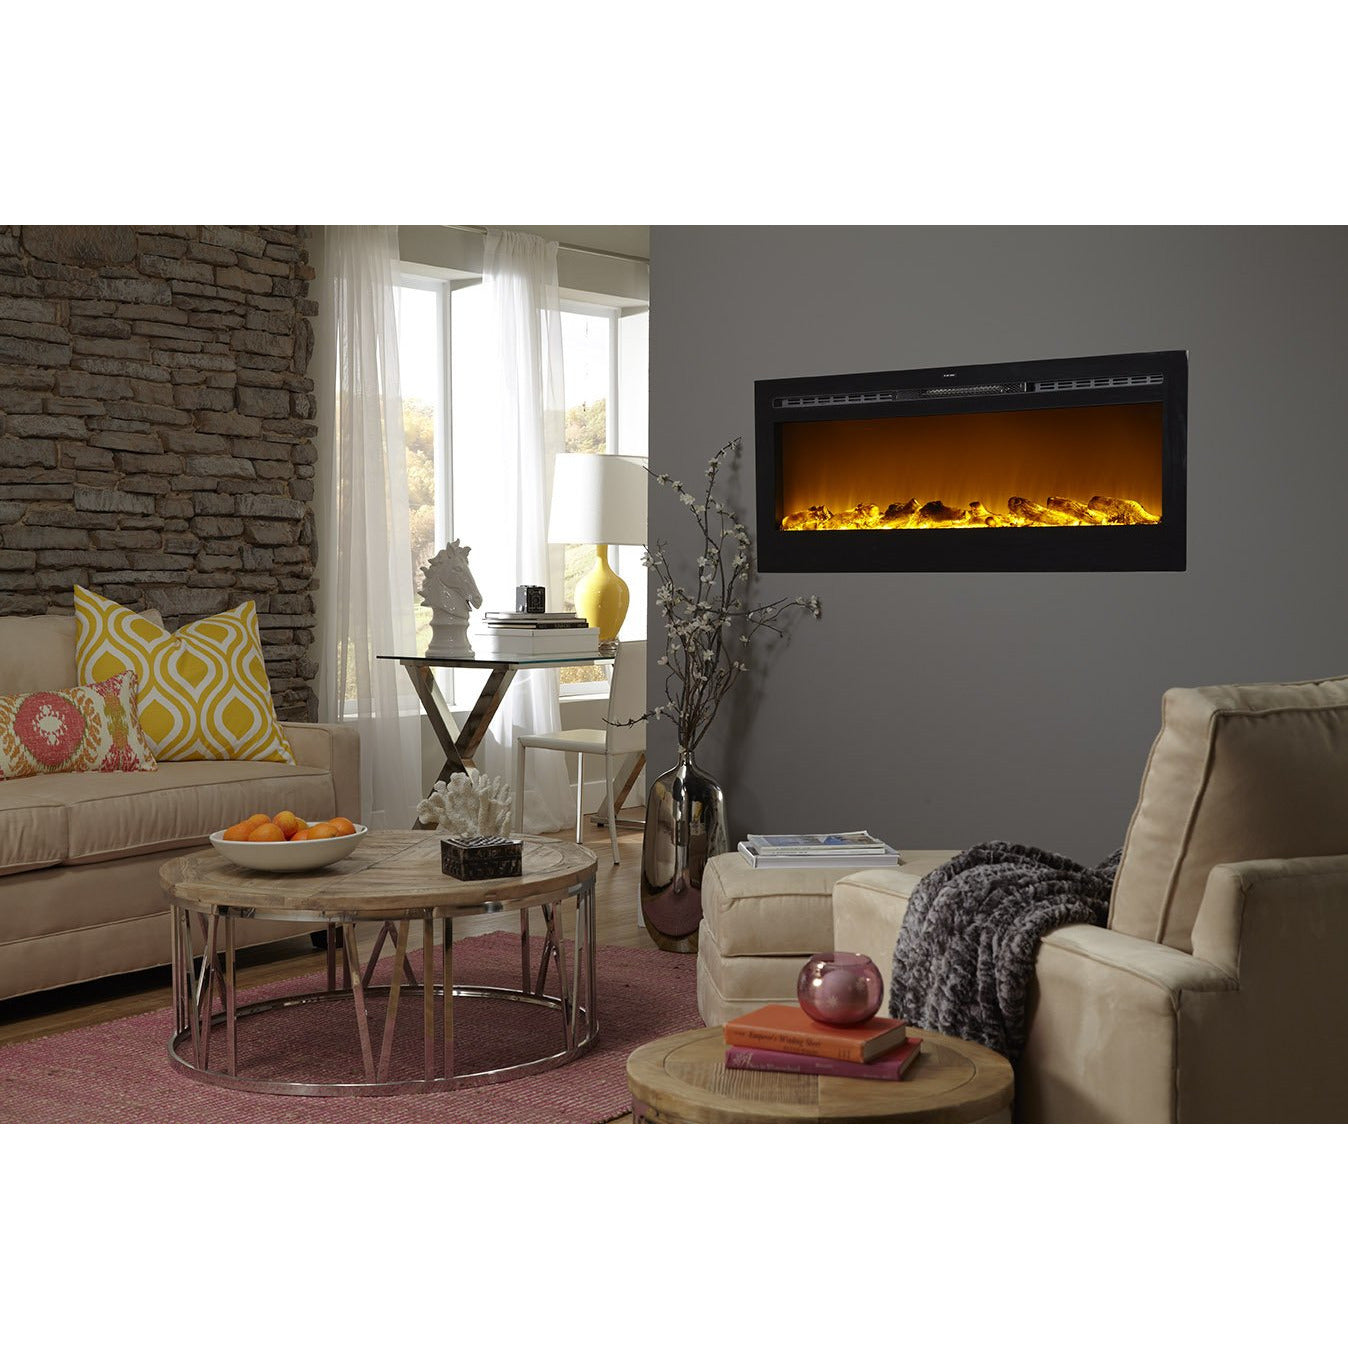 Living room with Touchstone Sideline 50" Recessed Mounted Black Frame Electric Fireplace | Fireplace remodel